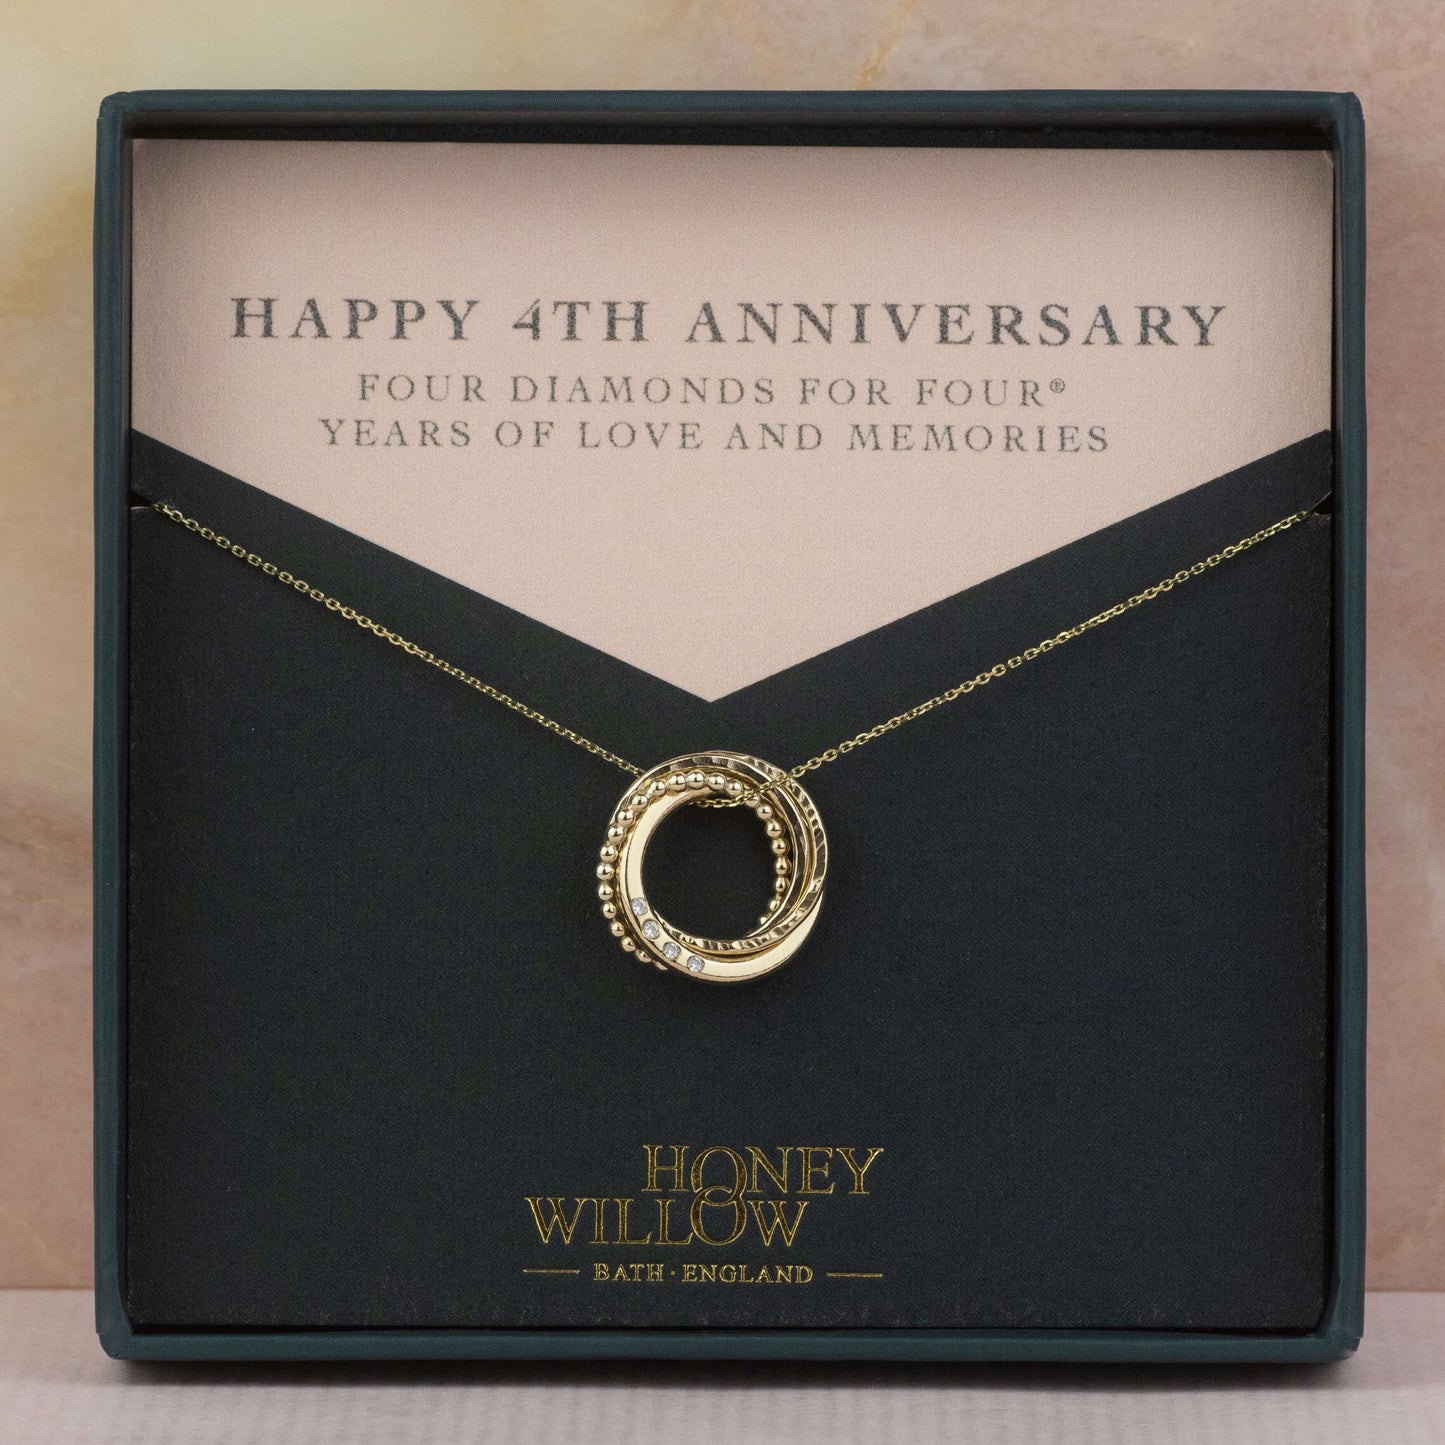 4th Anniversary Necklace - 4 Diamonds for 4 Decades - 9kt Gold